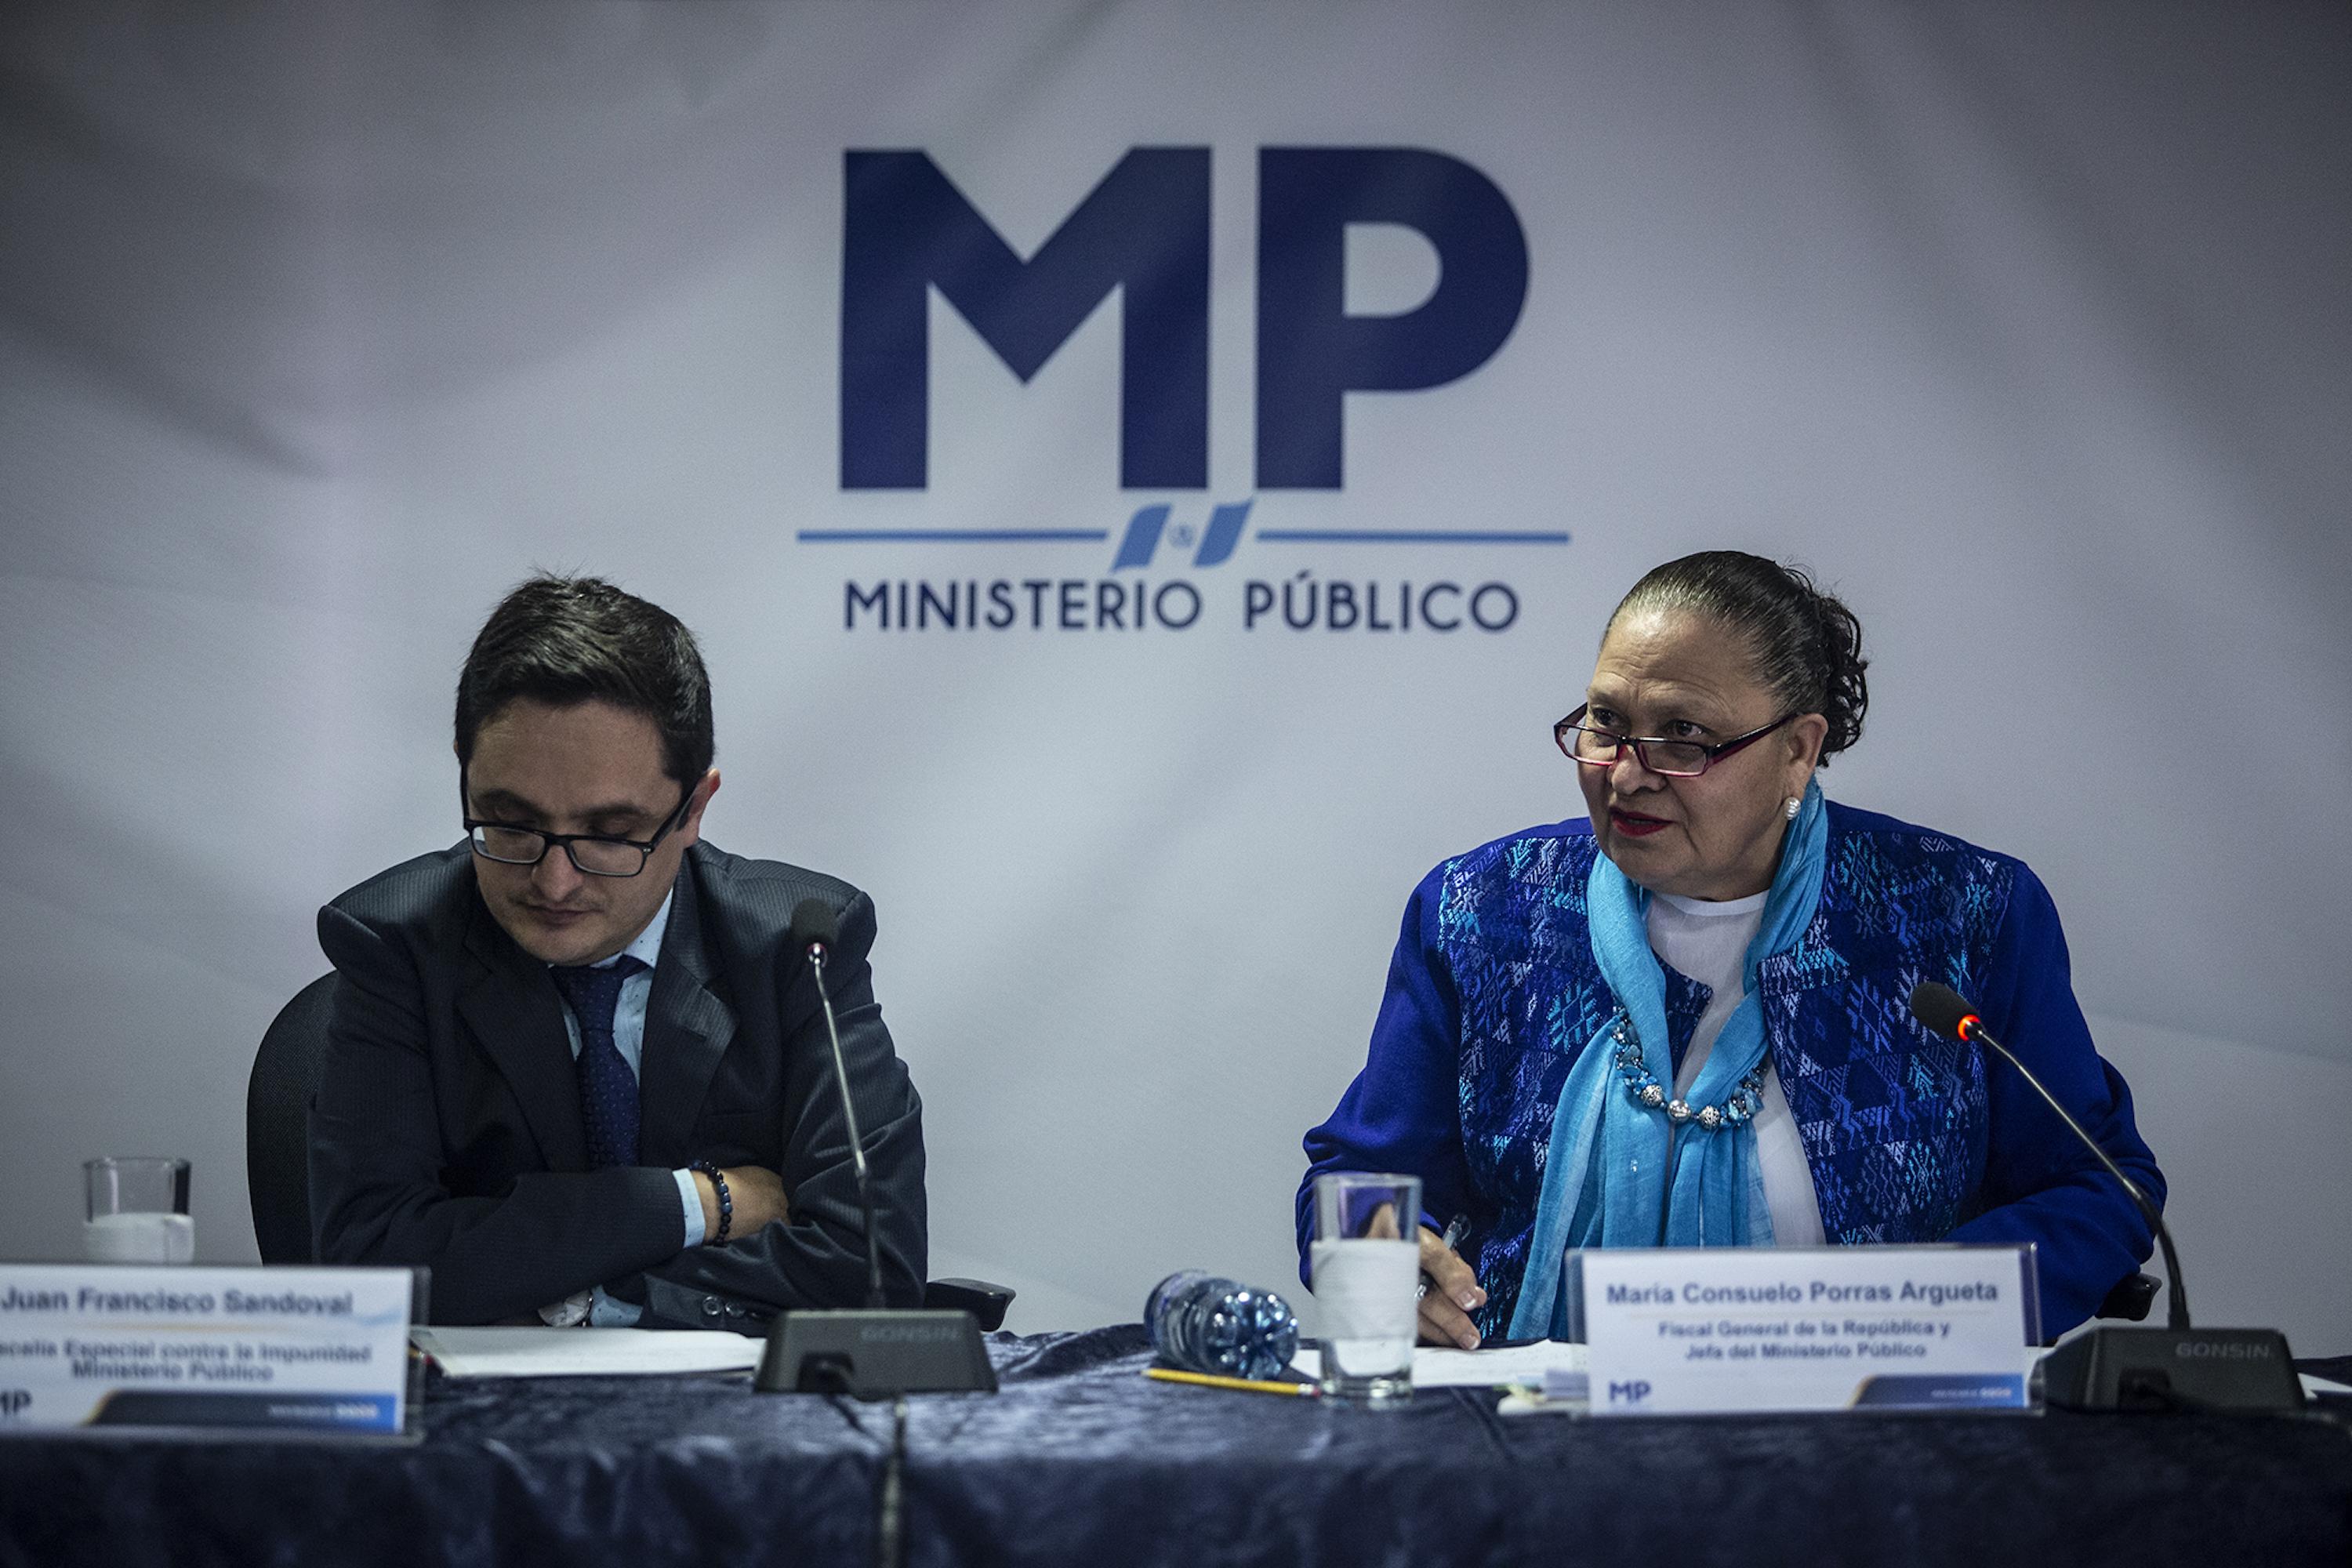 Former FECI chief Juan Francisco Sandoval with Attorney General Consuelo Porras in a 2019 press conference, two years before he abandoned Guatemala for exile. At the time of his dismissal in July 2021, his office was investigating evidence of corruption including informatino that Guatemalan President Alejandro Giammattei had negotiated multimillion-dollar bribes from construction firms to finance his 2019 electoral campaign. Photo: Carlos Barrera/El Faro